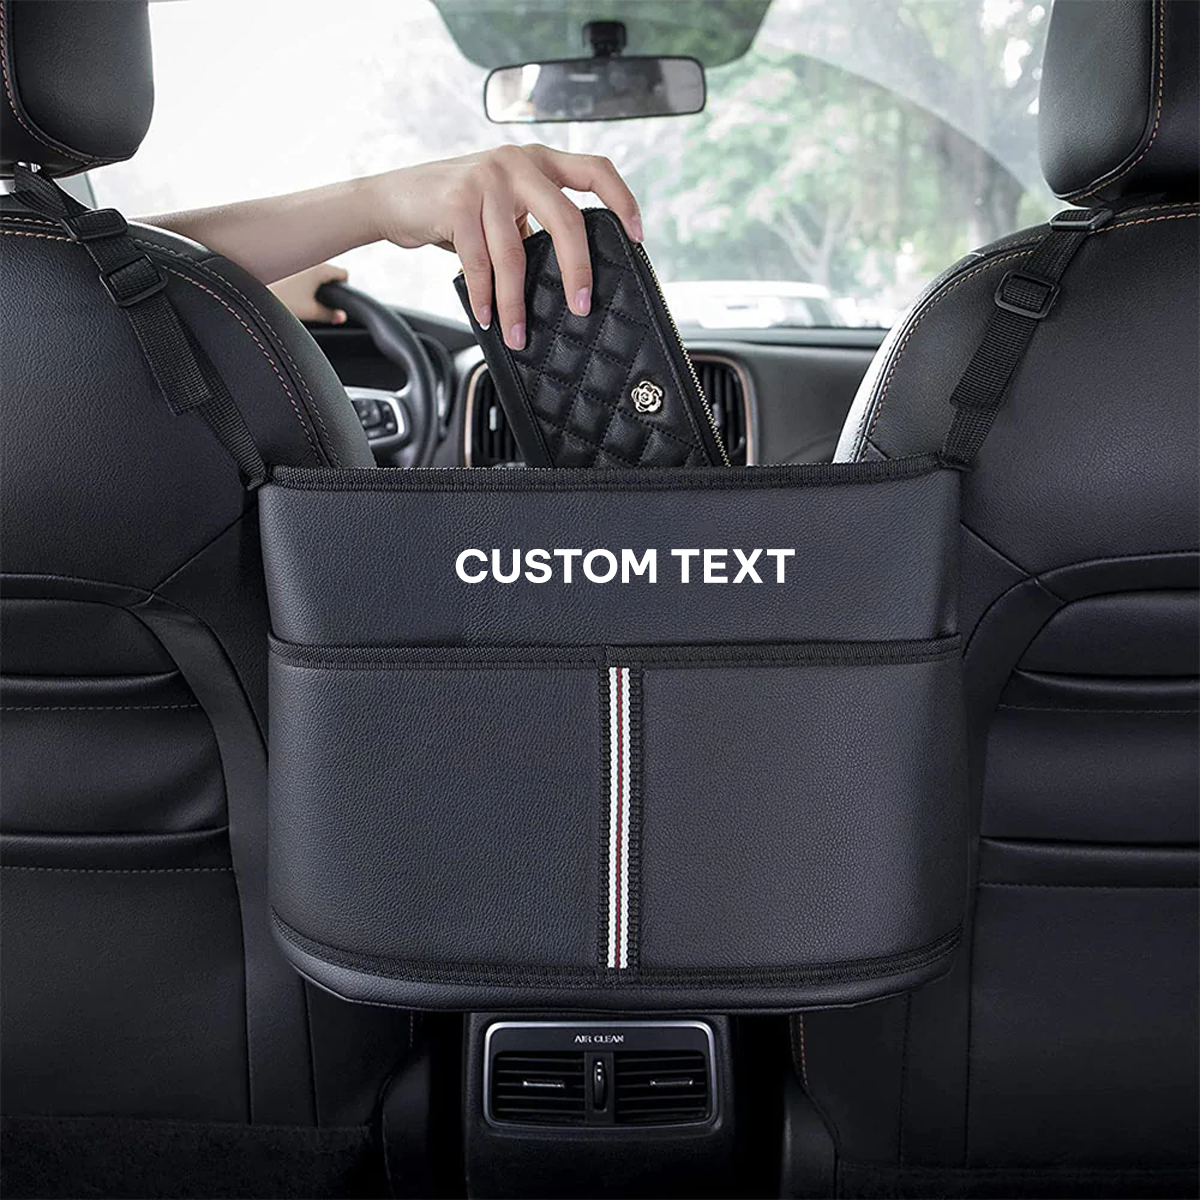 Custom Text For Car Purse Holder for Car Handbag Holder Between Seats Premium PU Leather, Compatible with All Cars, Auto Driver Or Passenger Accessories Organizer, Hanging Car Purse Storage Pocket Back Seat Pet Barrier SU11991